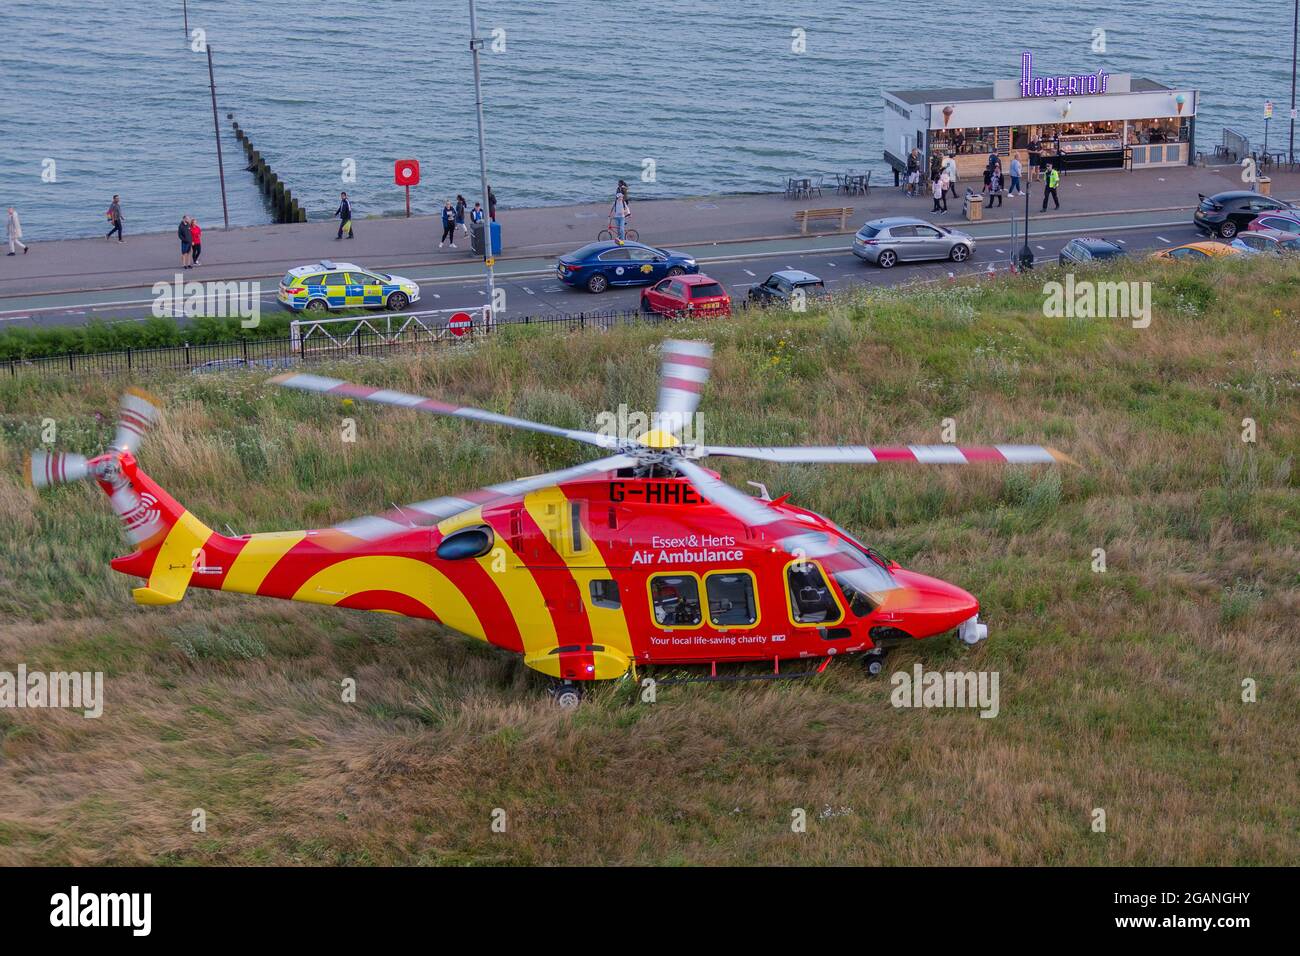 Southend-on-Sea, UK. 31st Jul, 2021. The Essex & Herts air ambulance lands close to seafront in Southend-on-Sea, UK, to attend an emergency incident. Penelope Barritt/Alamy Live News Stock Photo